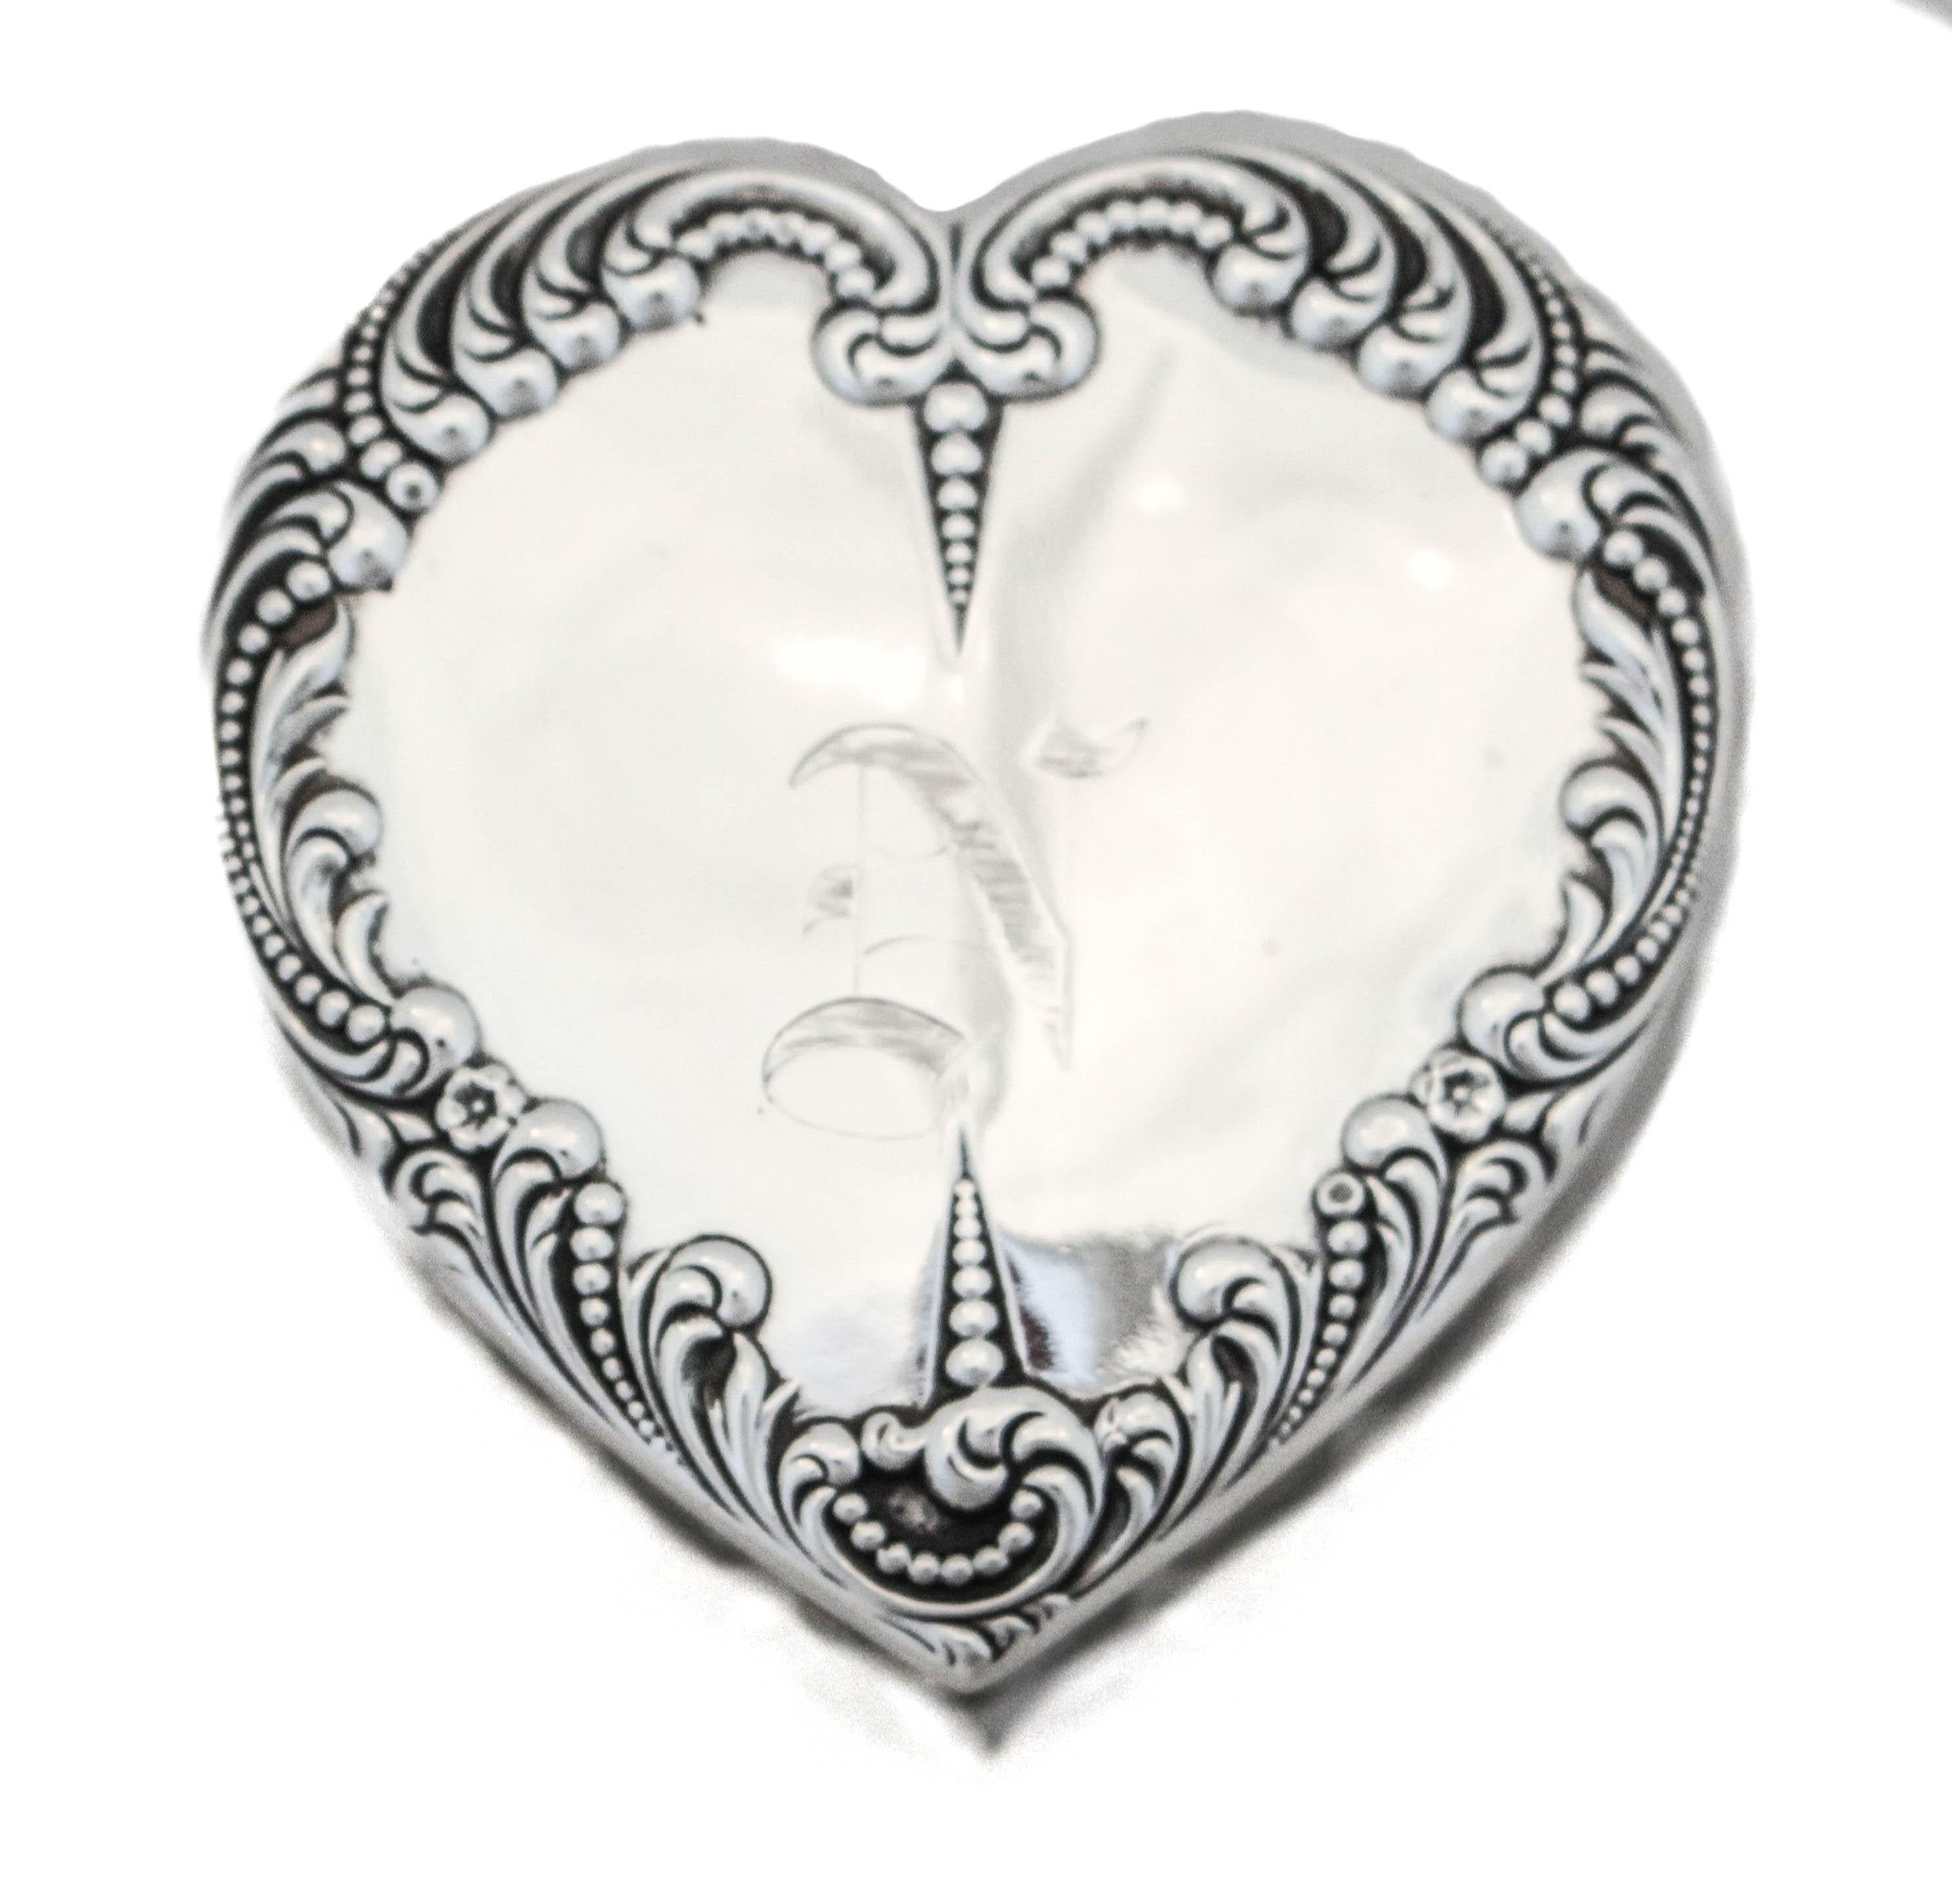 We are happy to offer you this sterling silver and crystal heart shaped box. The lid is sterling silver and has fancy raised work around the edge with a hand engraved Old English “N” in the center. The box is cut-crystal with grooves in between each